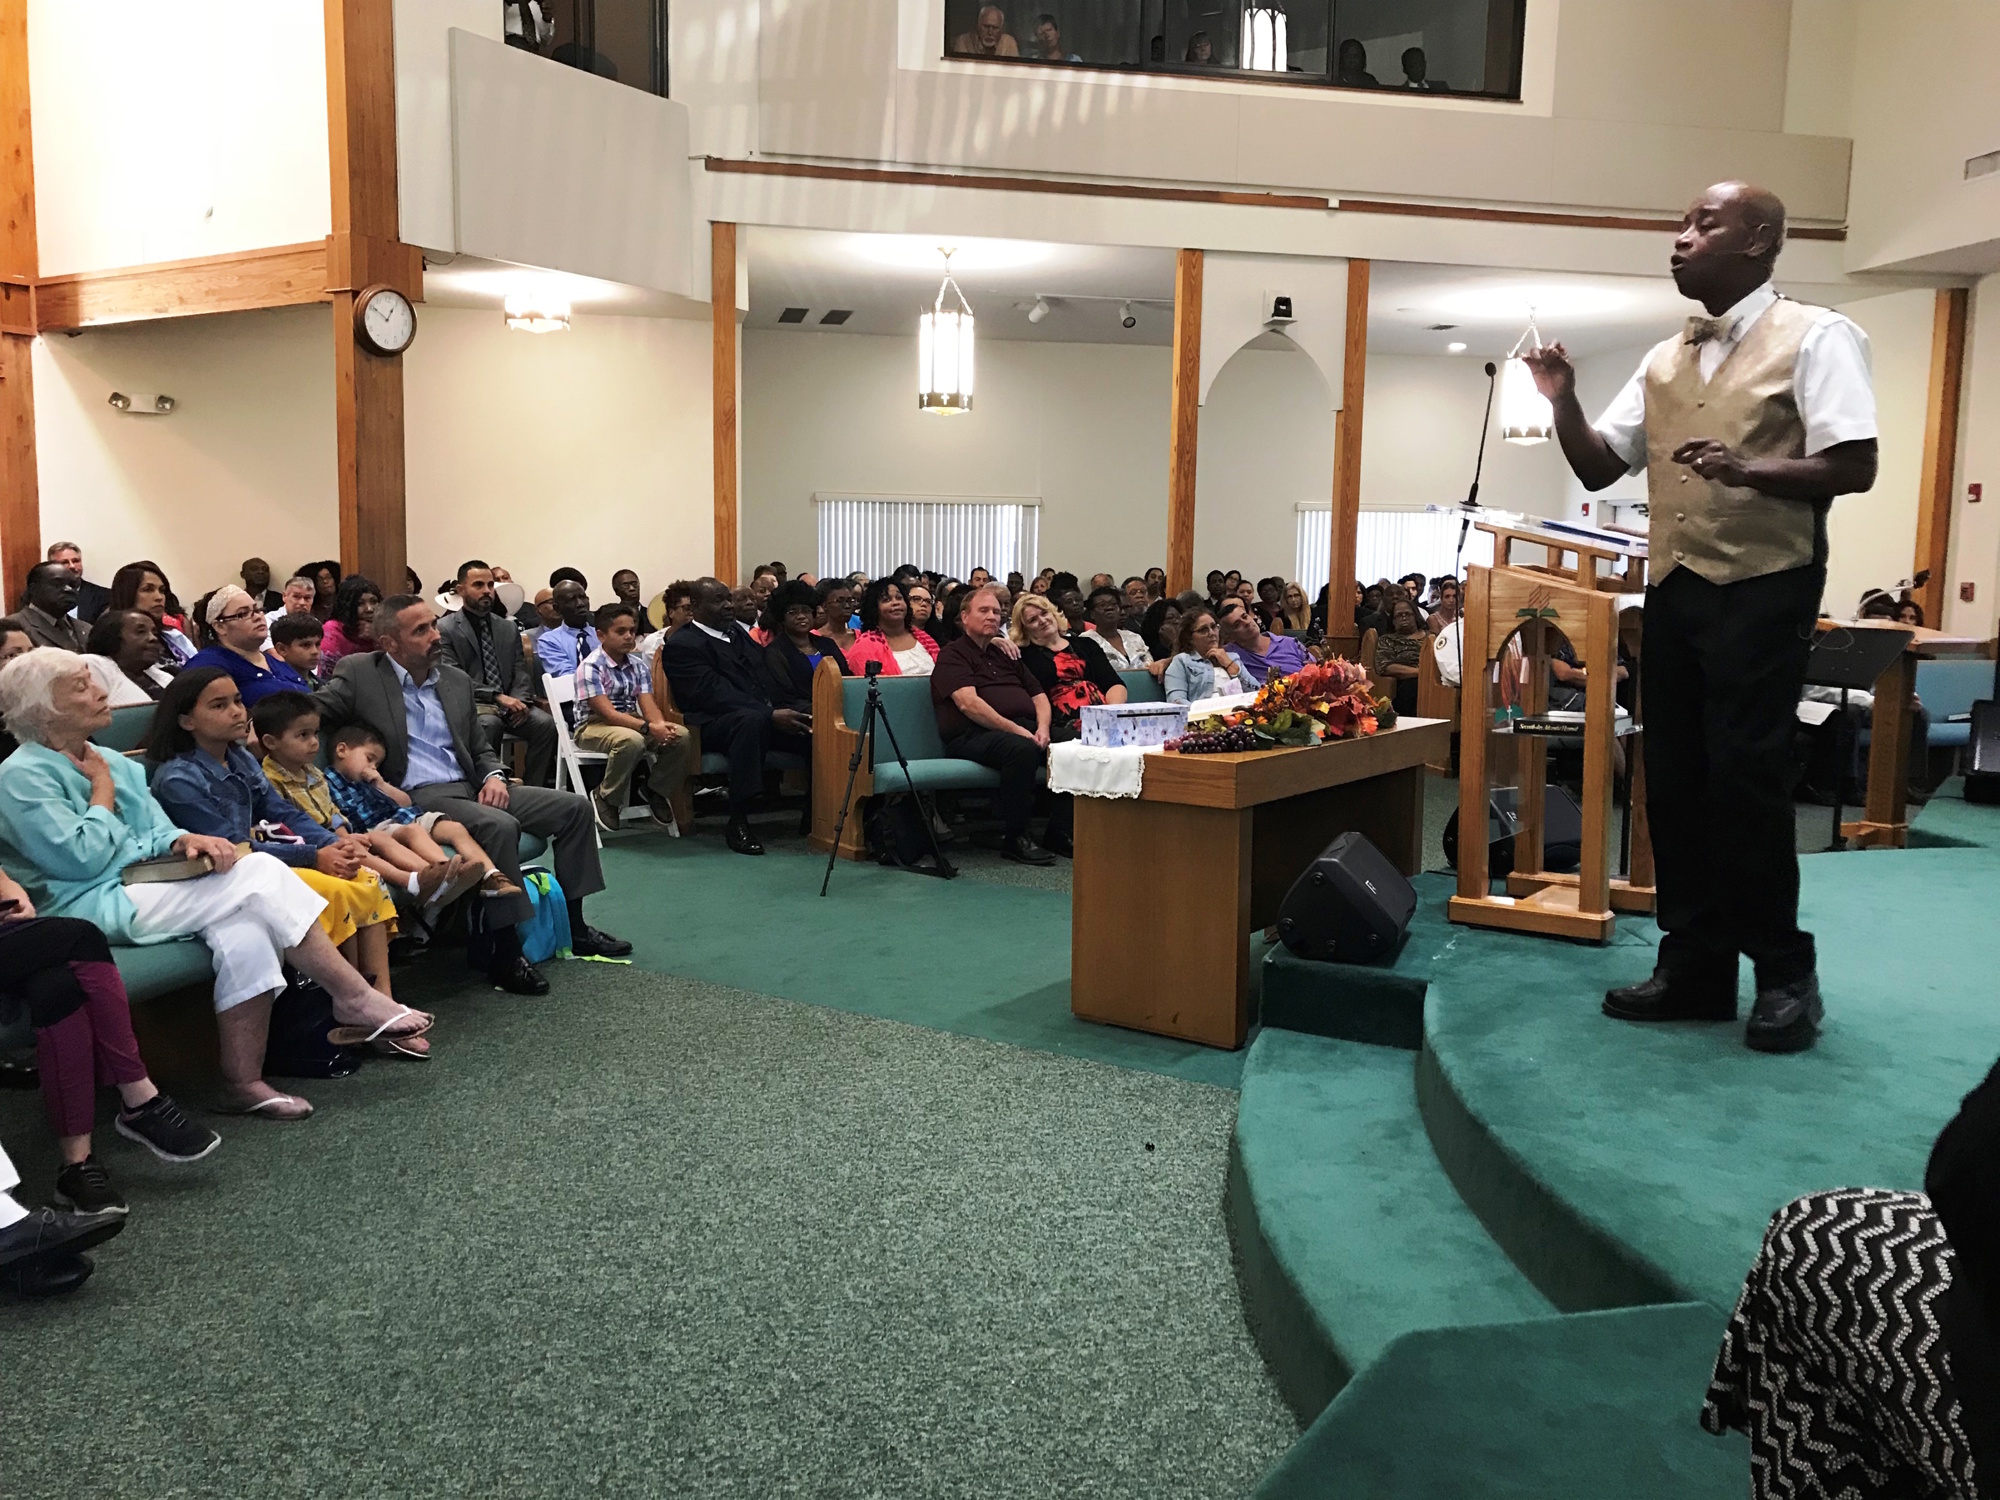 More than 450 community members joined Florida Hospital Flagler for Sabbath services and a musical concert at the Seventh-day Adventist Church in Palm Coast in October. Photo courtesy of FHF